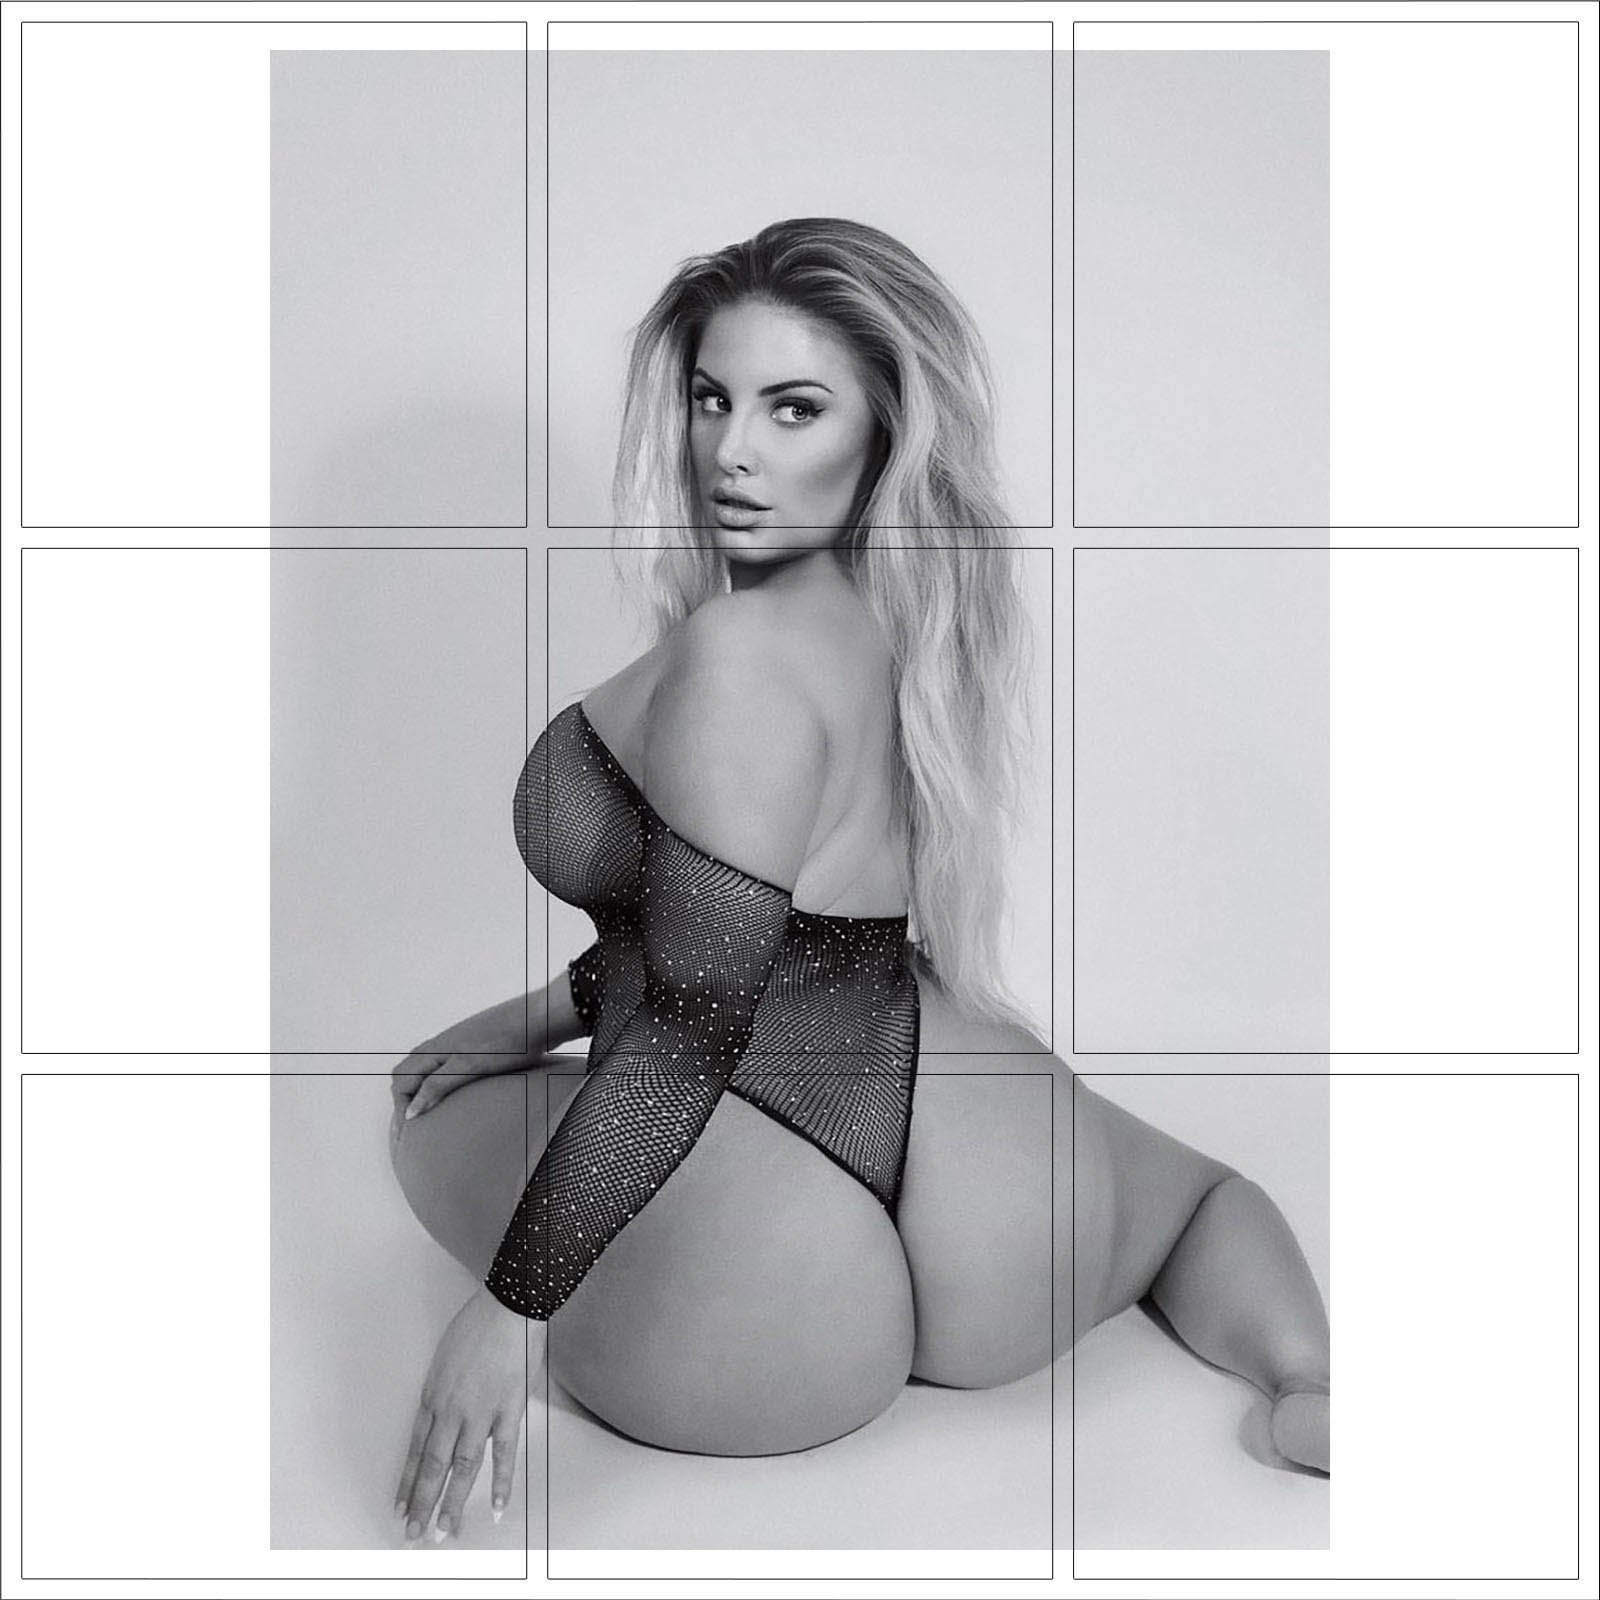 alma mckee recommends ashley alexiss naked pic